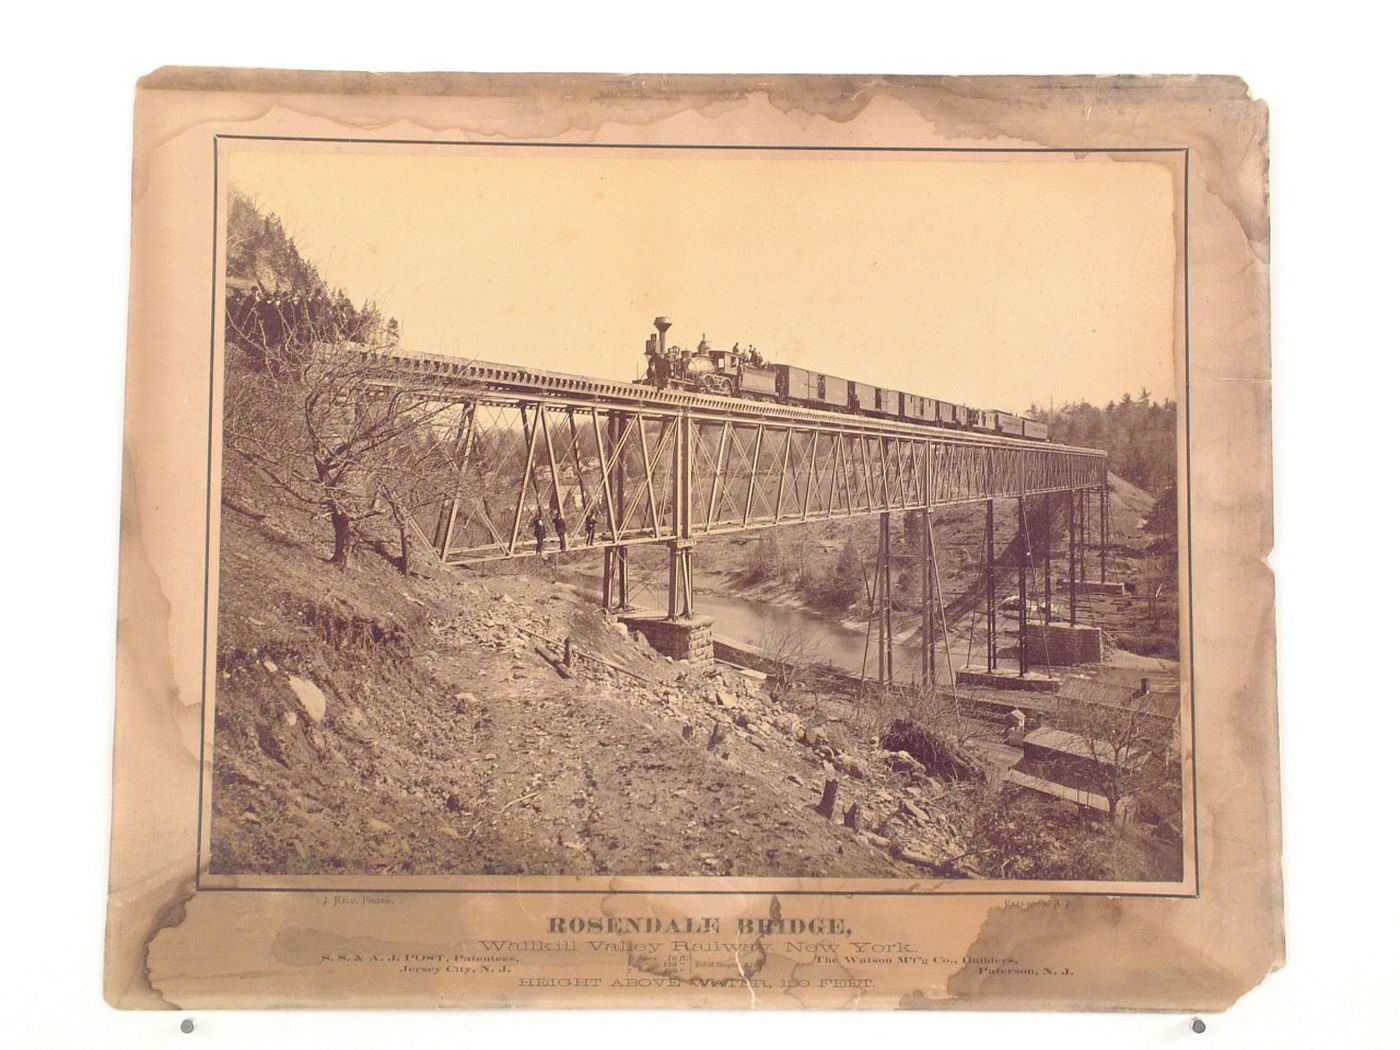 View of the Rosendale Bridge showing a train, people and the Rondout Creek, Rosendale, New York, United States